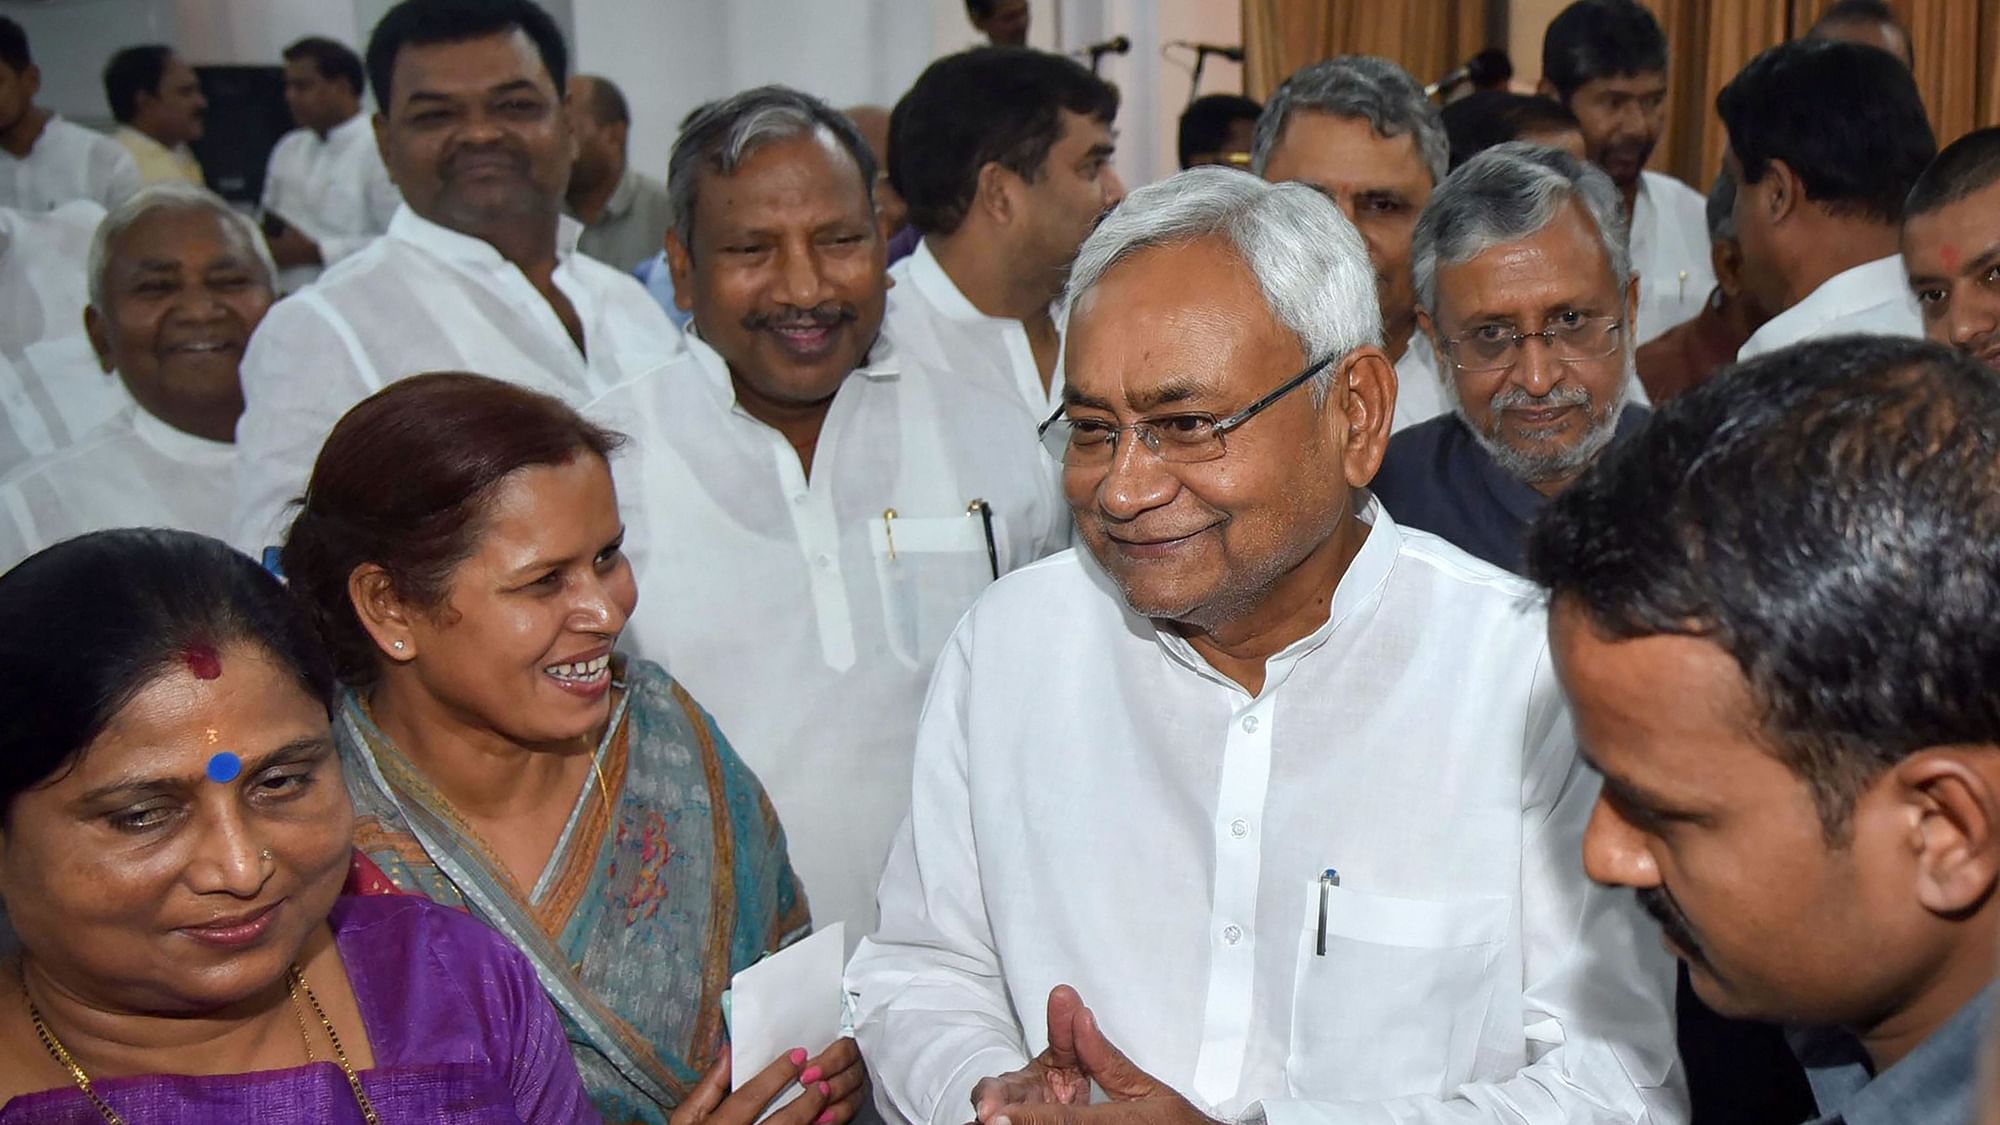 Bihar CM Nitish Kumar along with deputy CM Sushil Kumar Modi during the swearing-in ceremony for the Cabinet expansion  in Patna.